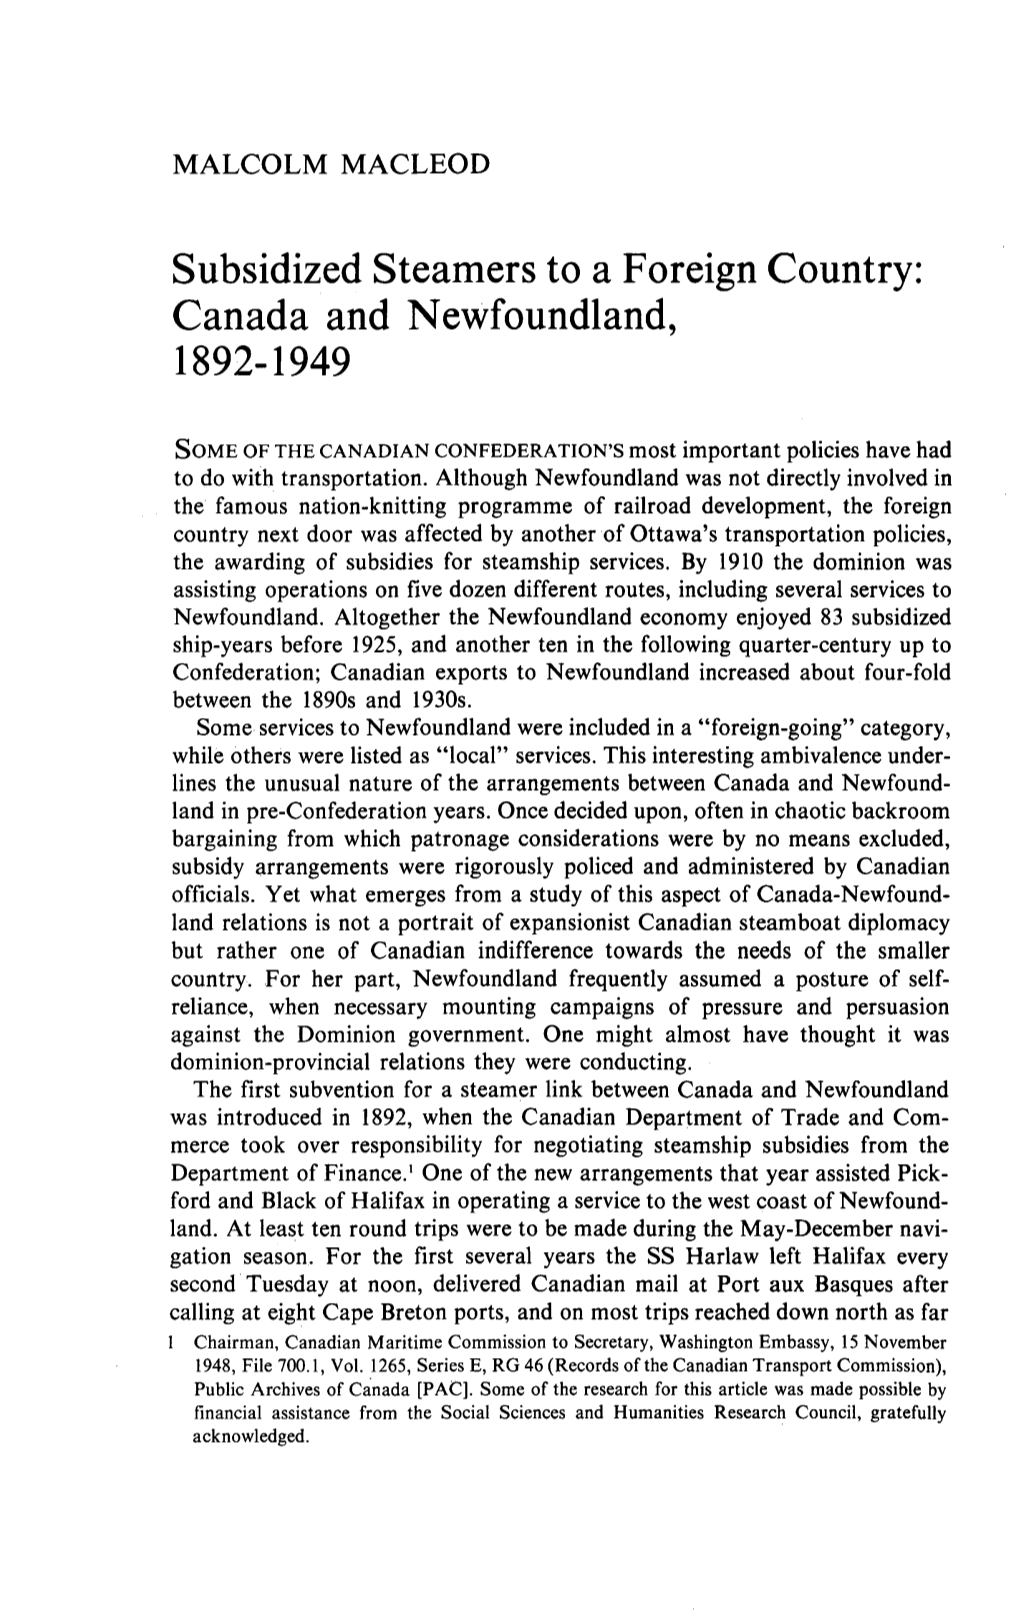 Subsidized Steamers to a Foreign Country: Canada and Newfoundland, 1892-1949